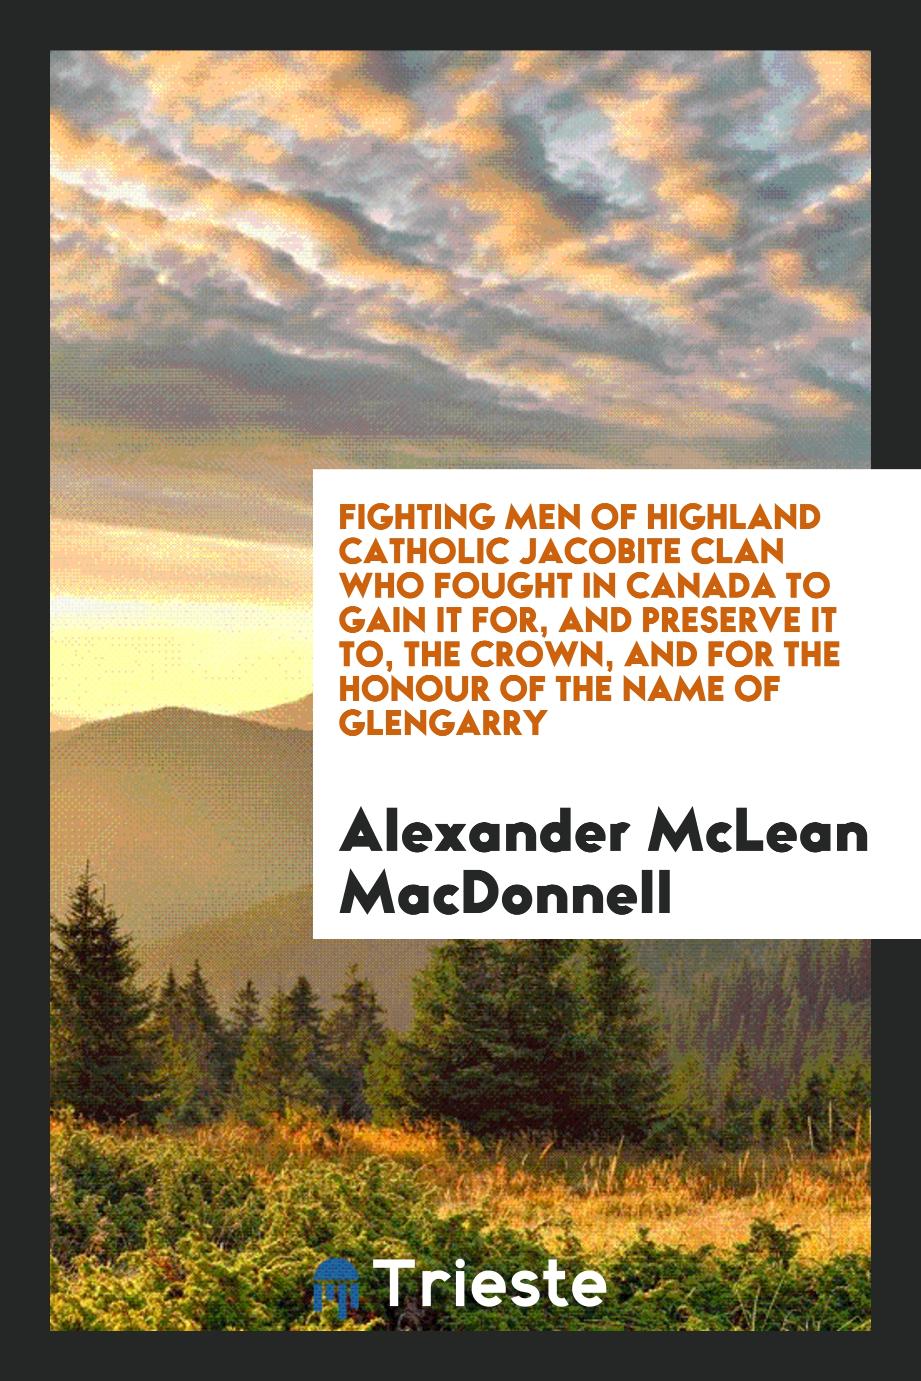 Fighting men of Highland Catholic Jacobite clan who fought in Canada to gain it for, and preserve it to, the Crown, and for the honour of the name of Glengarry